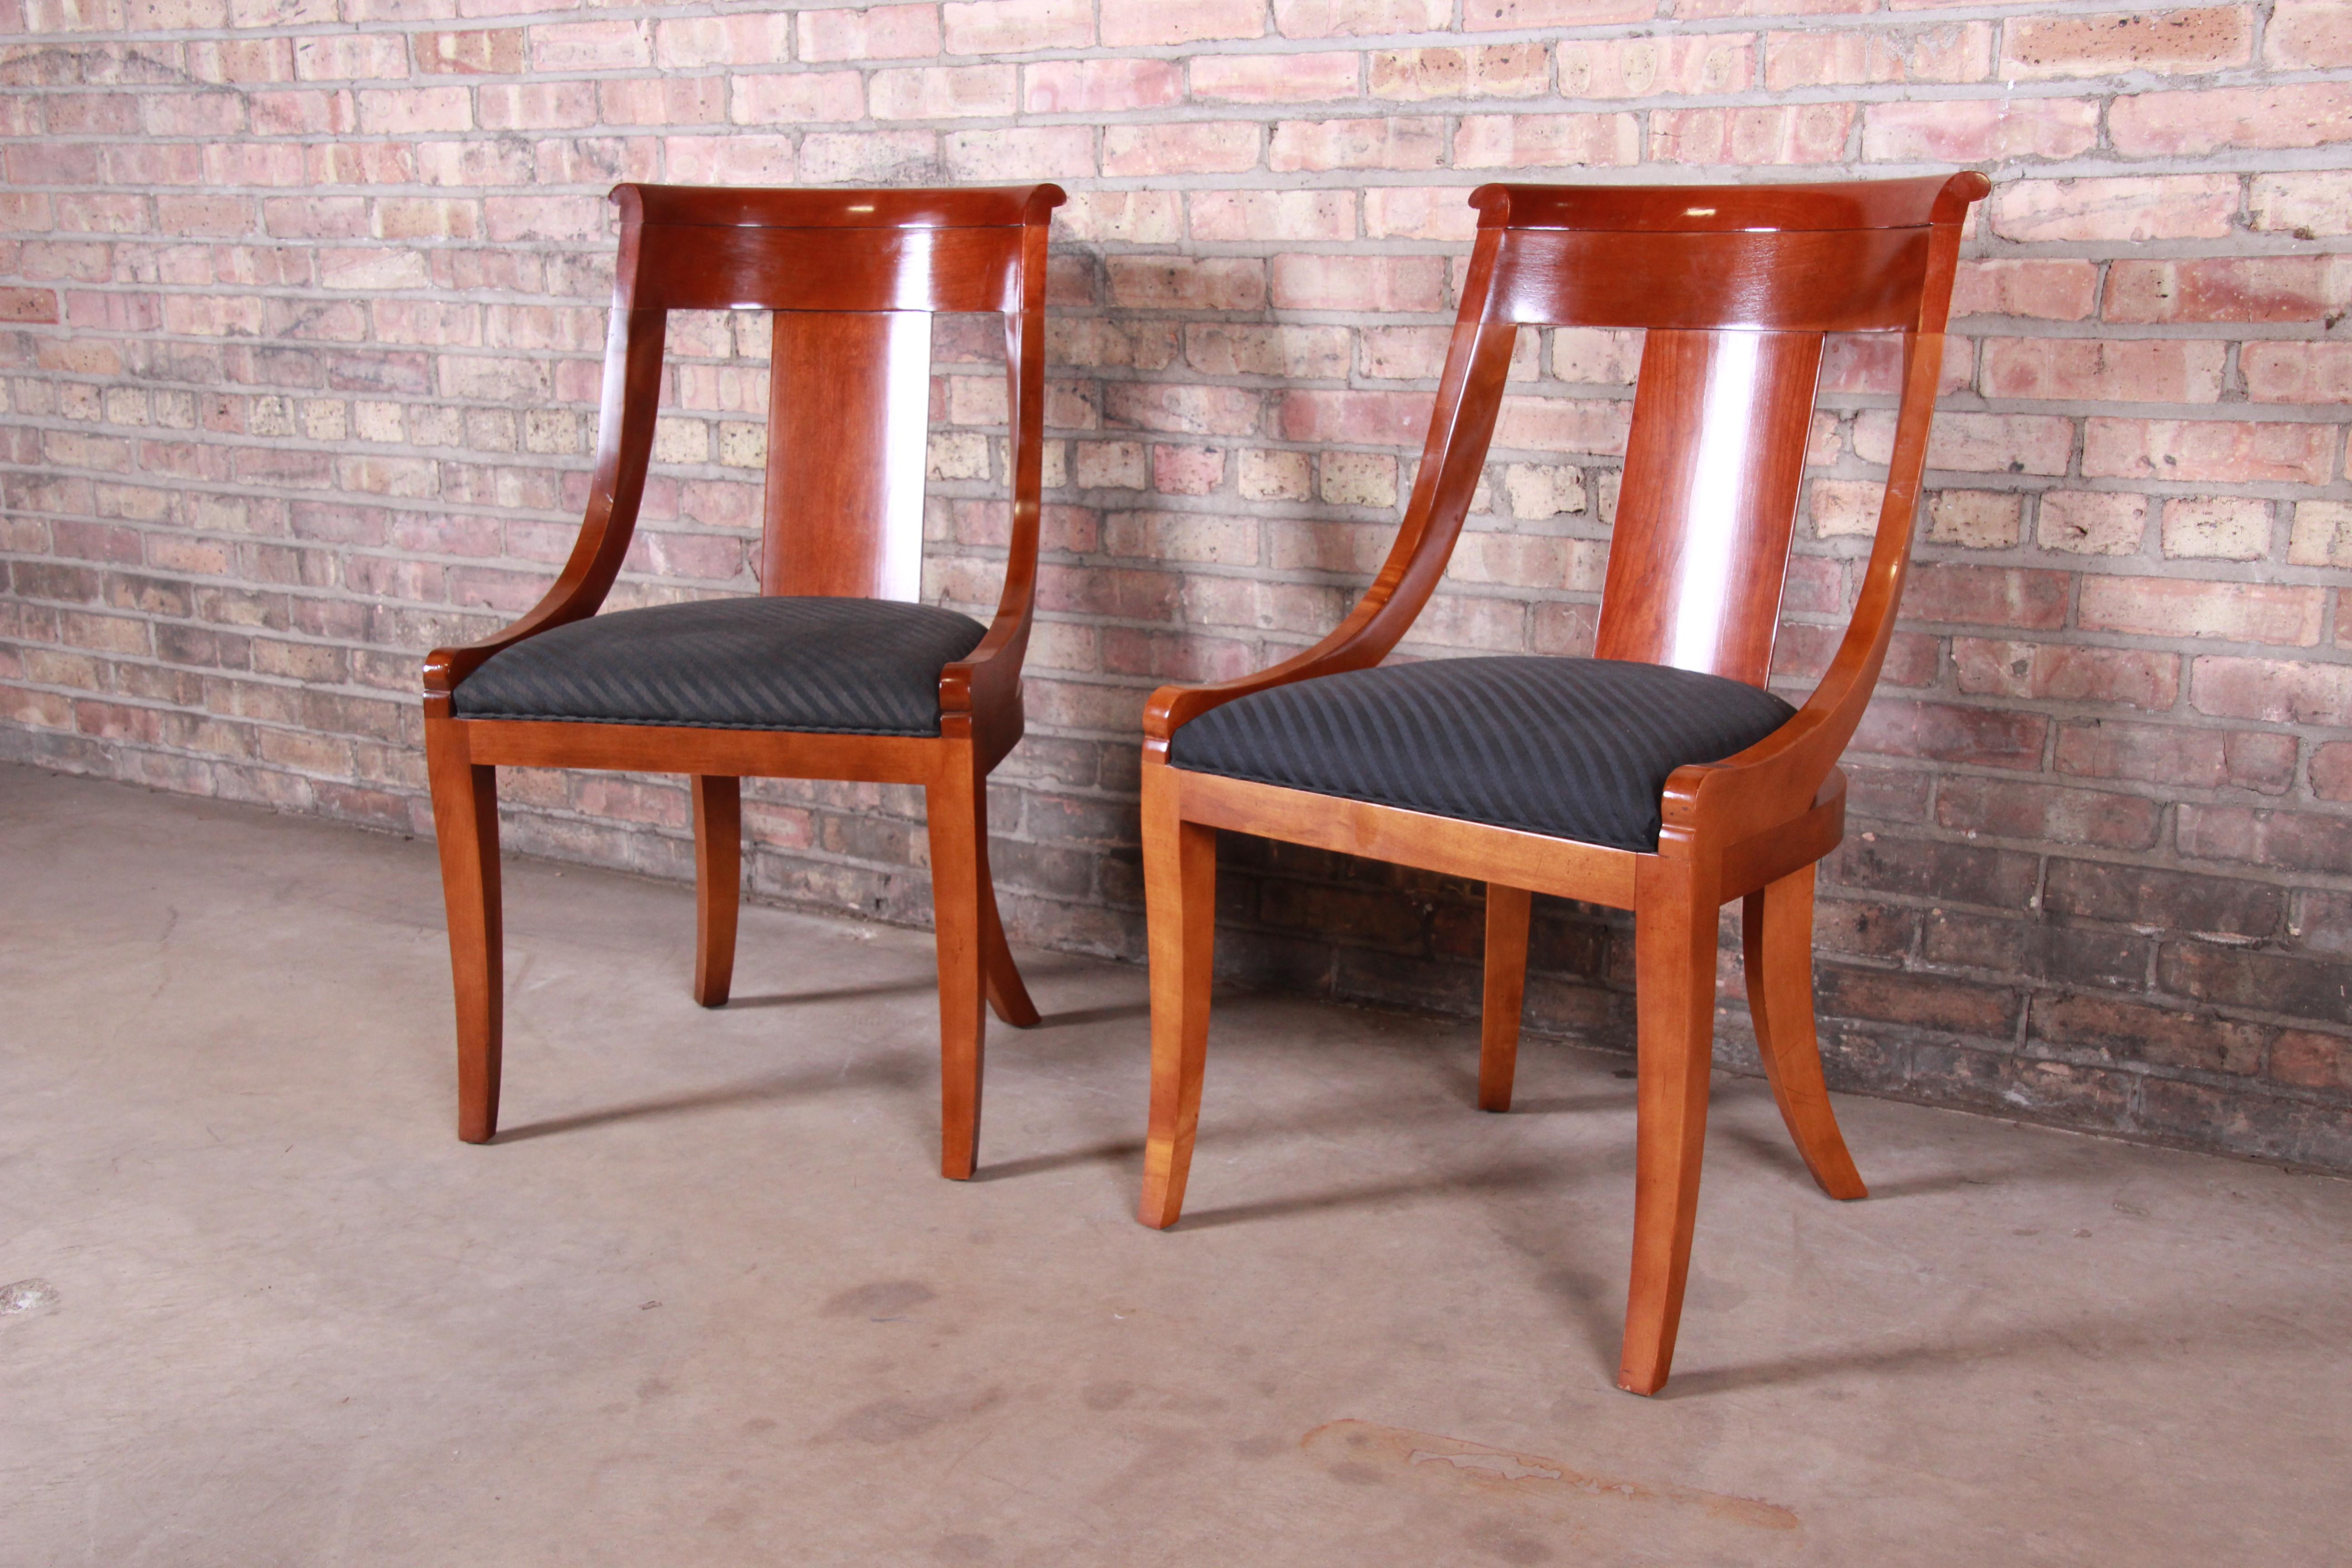 Upholstery Baker Furniture Cherrywood Regency Dining Chairs, Set of Six